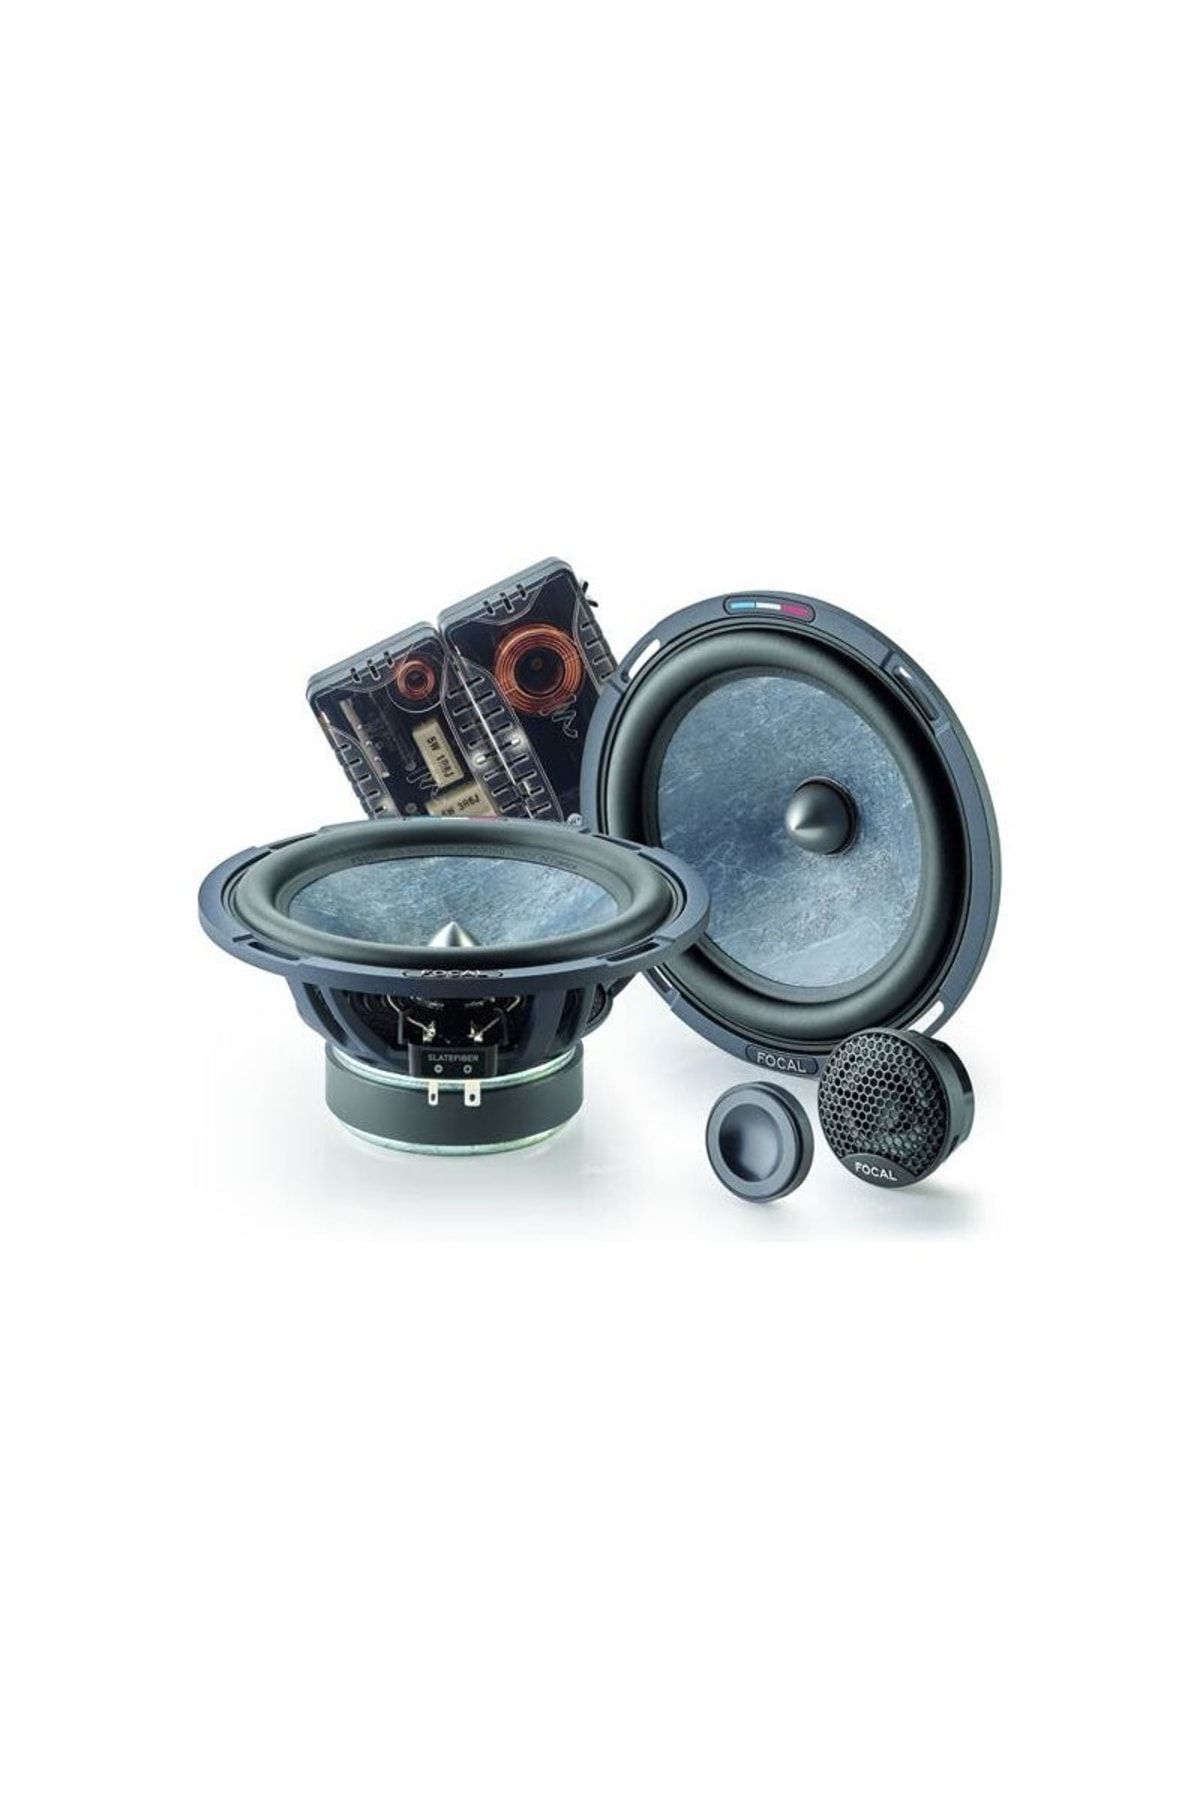 Focal Ps 165 Sf 2-way Components